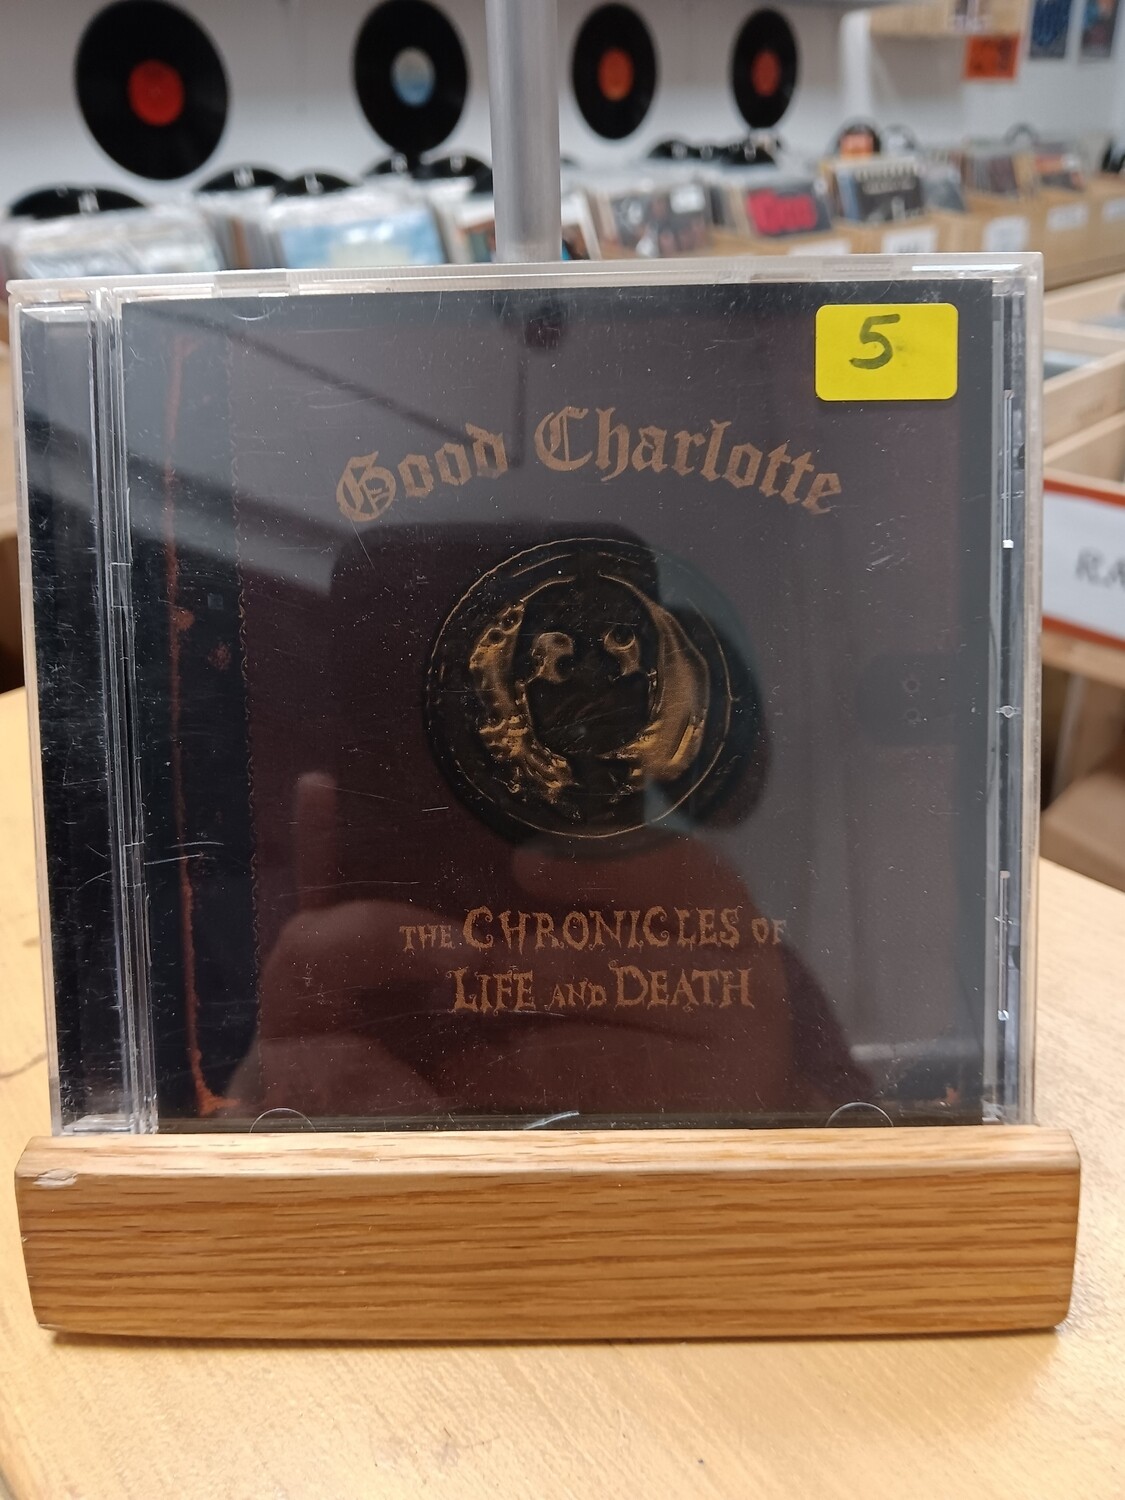 Good Charlotte - The chronicles of life and death (CD)